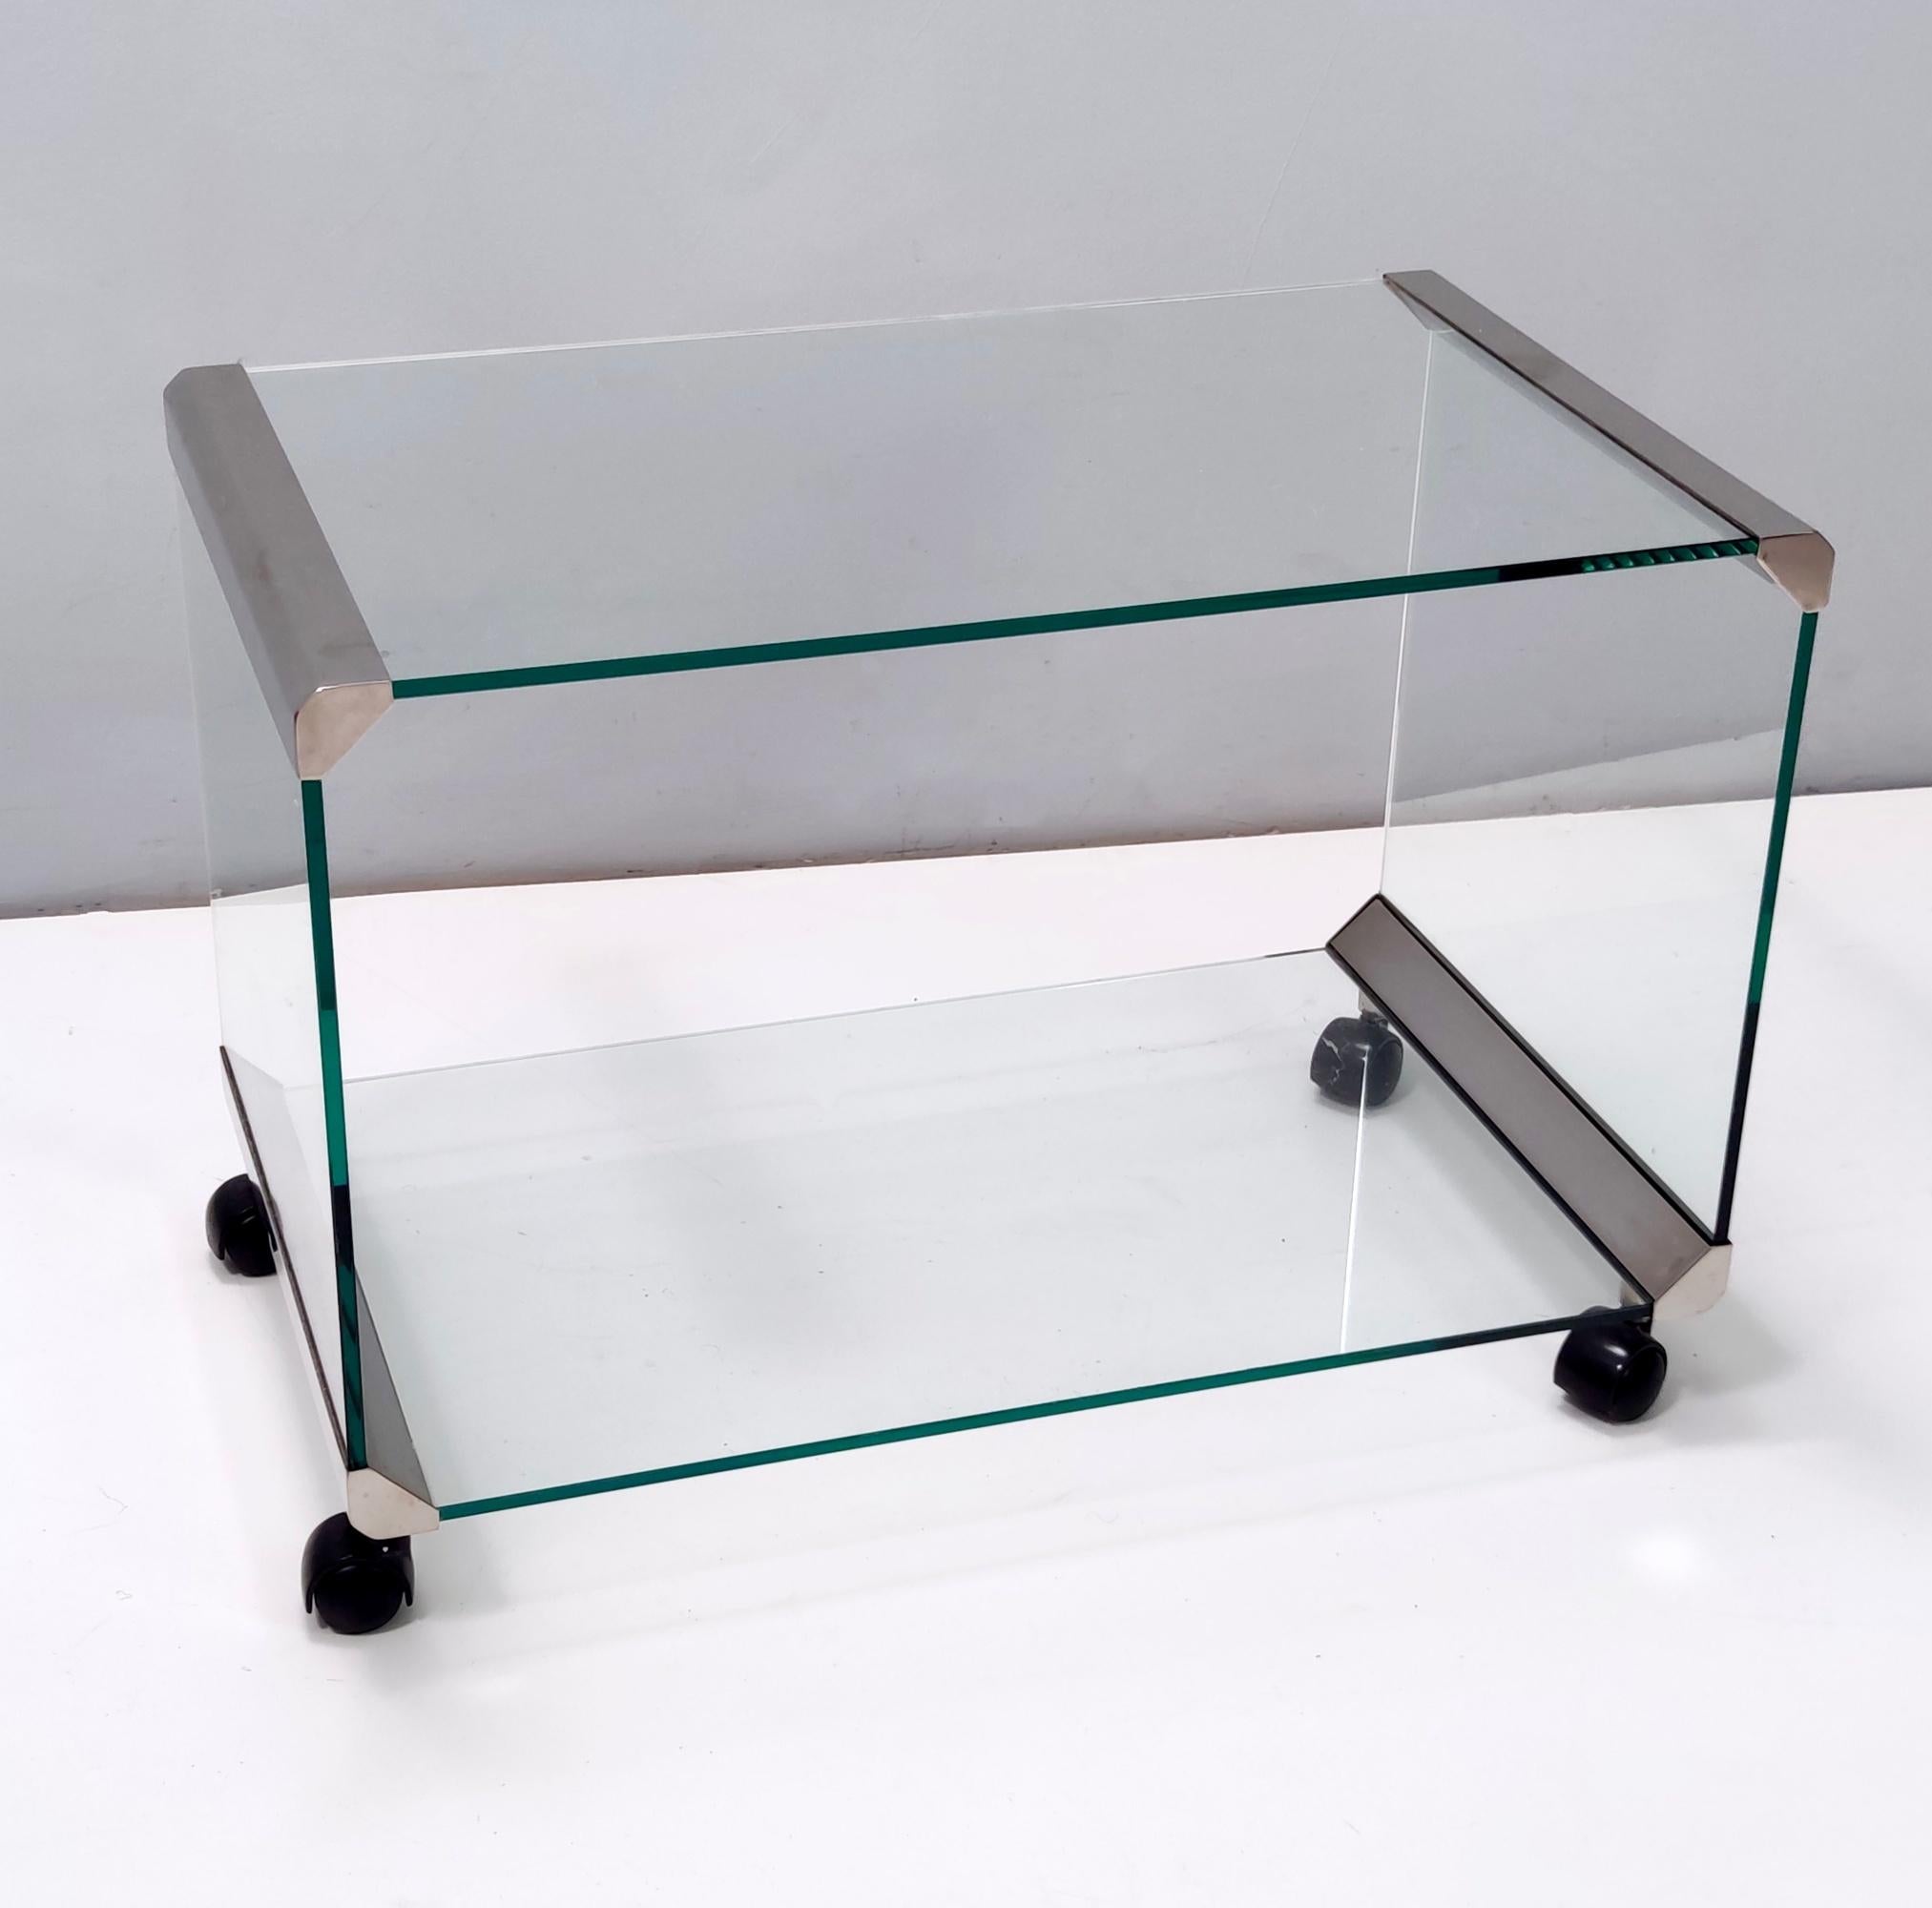 Late 20th Century Postmodern Tempered Glass and Steel Coffee Table by Gallotti E Radice, Italy